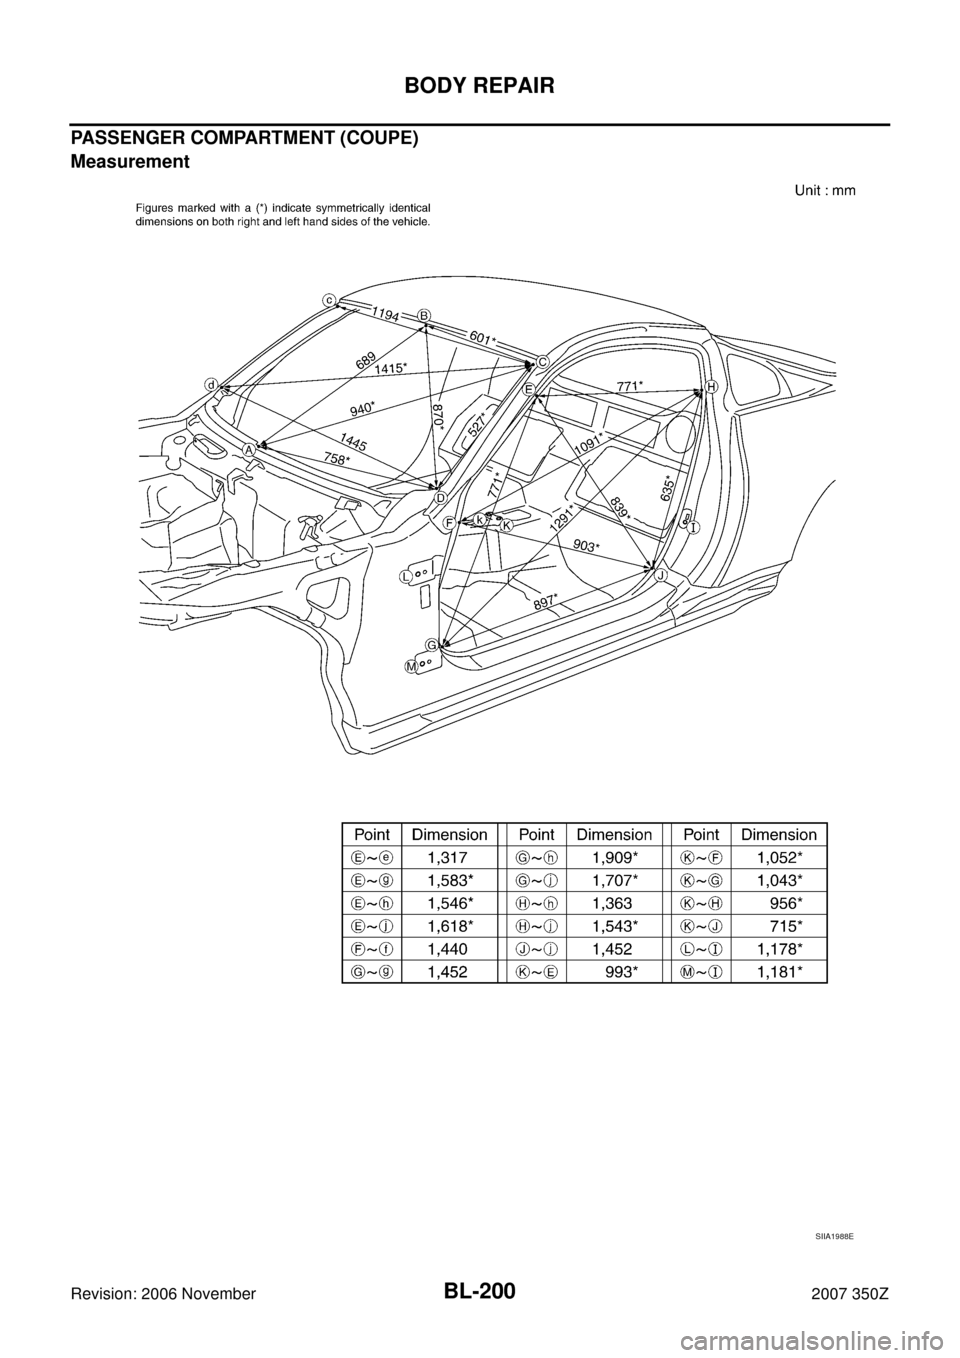 NISSAN 350Z 2007 Z33 Body, Lock And Security System Workshop Manual BL-200
BODY REPAIR
Revision: 2006 November2007 350Z
PASSENGER COMPARTMENT (COUPE)
Measurement
SIIA1988E 